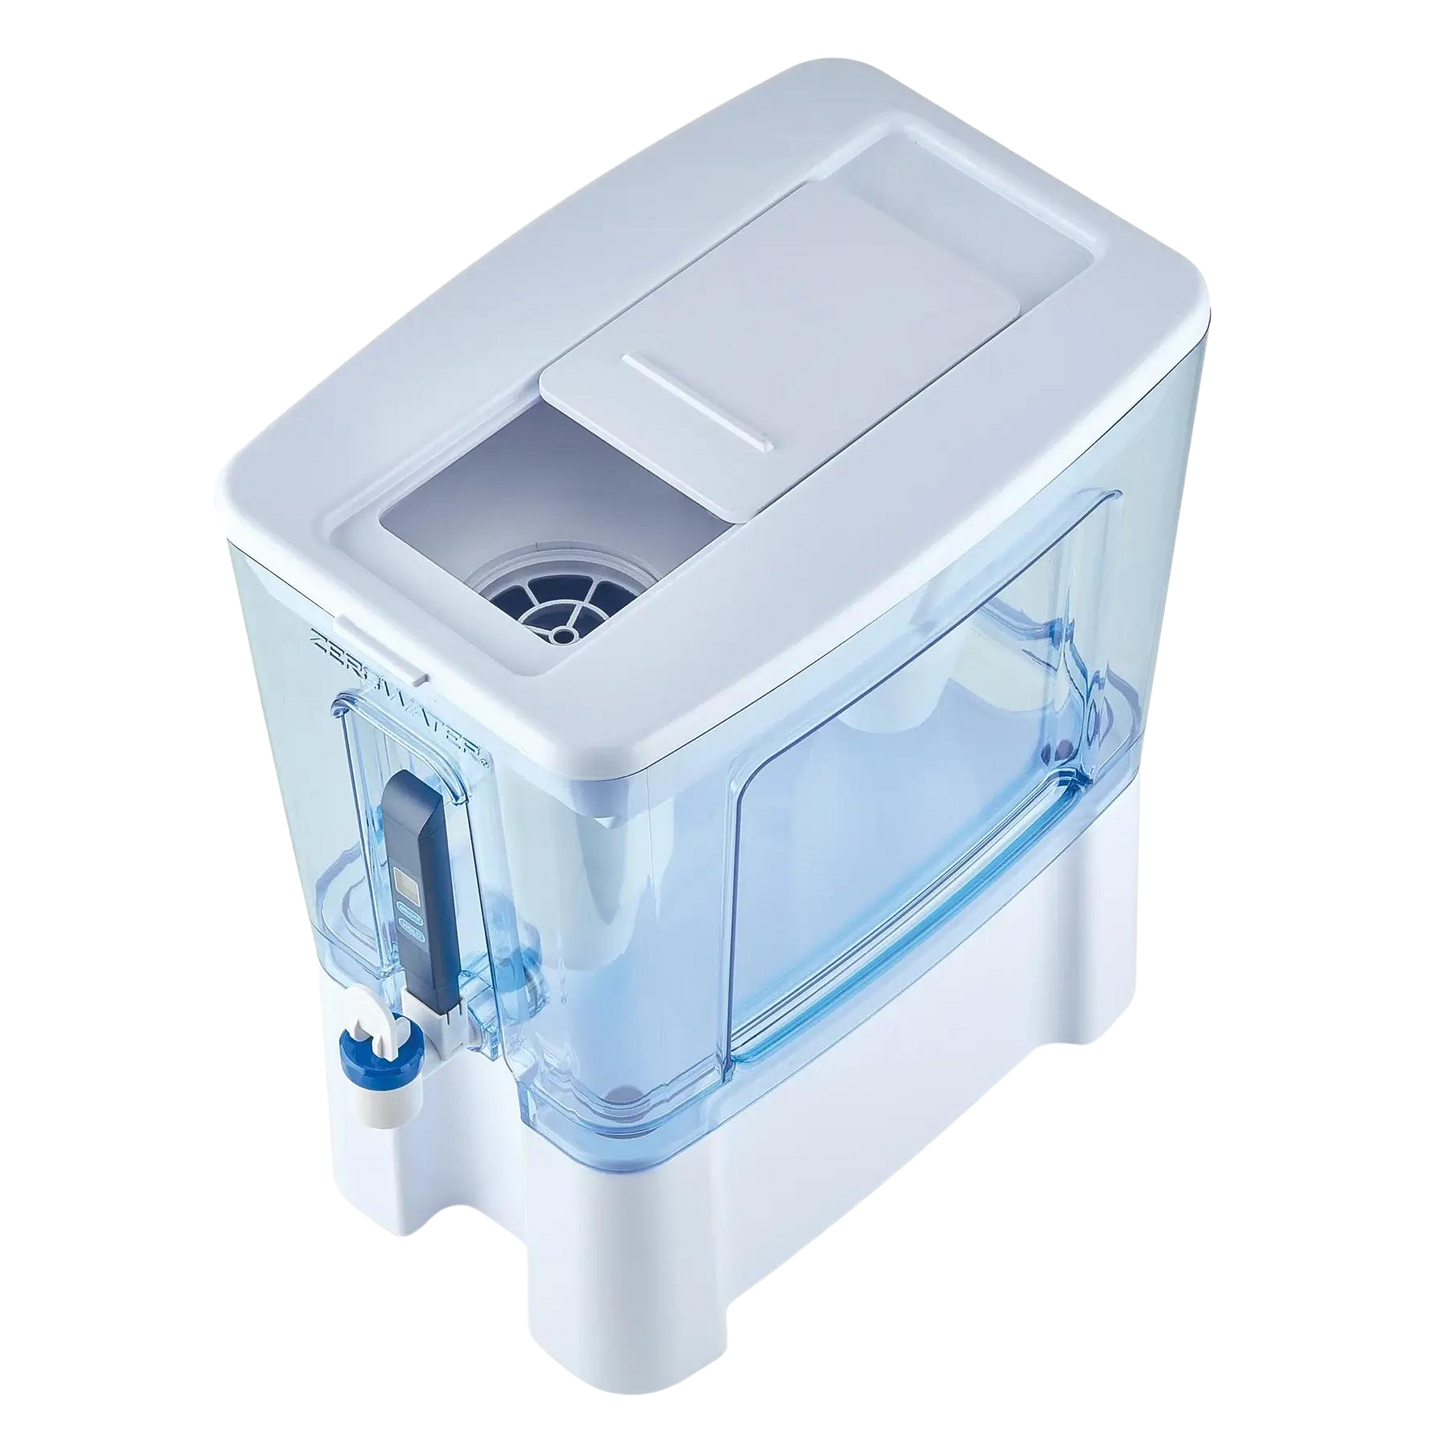 Combi-box 12,3 Liter Waterfiltersysteem Ready-Read incl. in totaal 6 filters